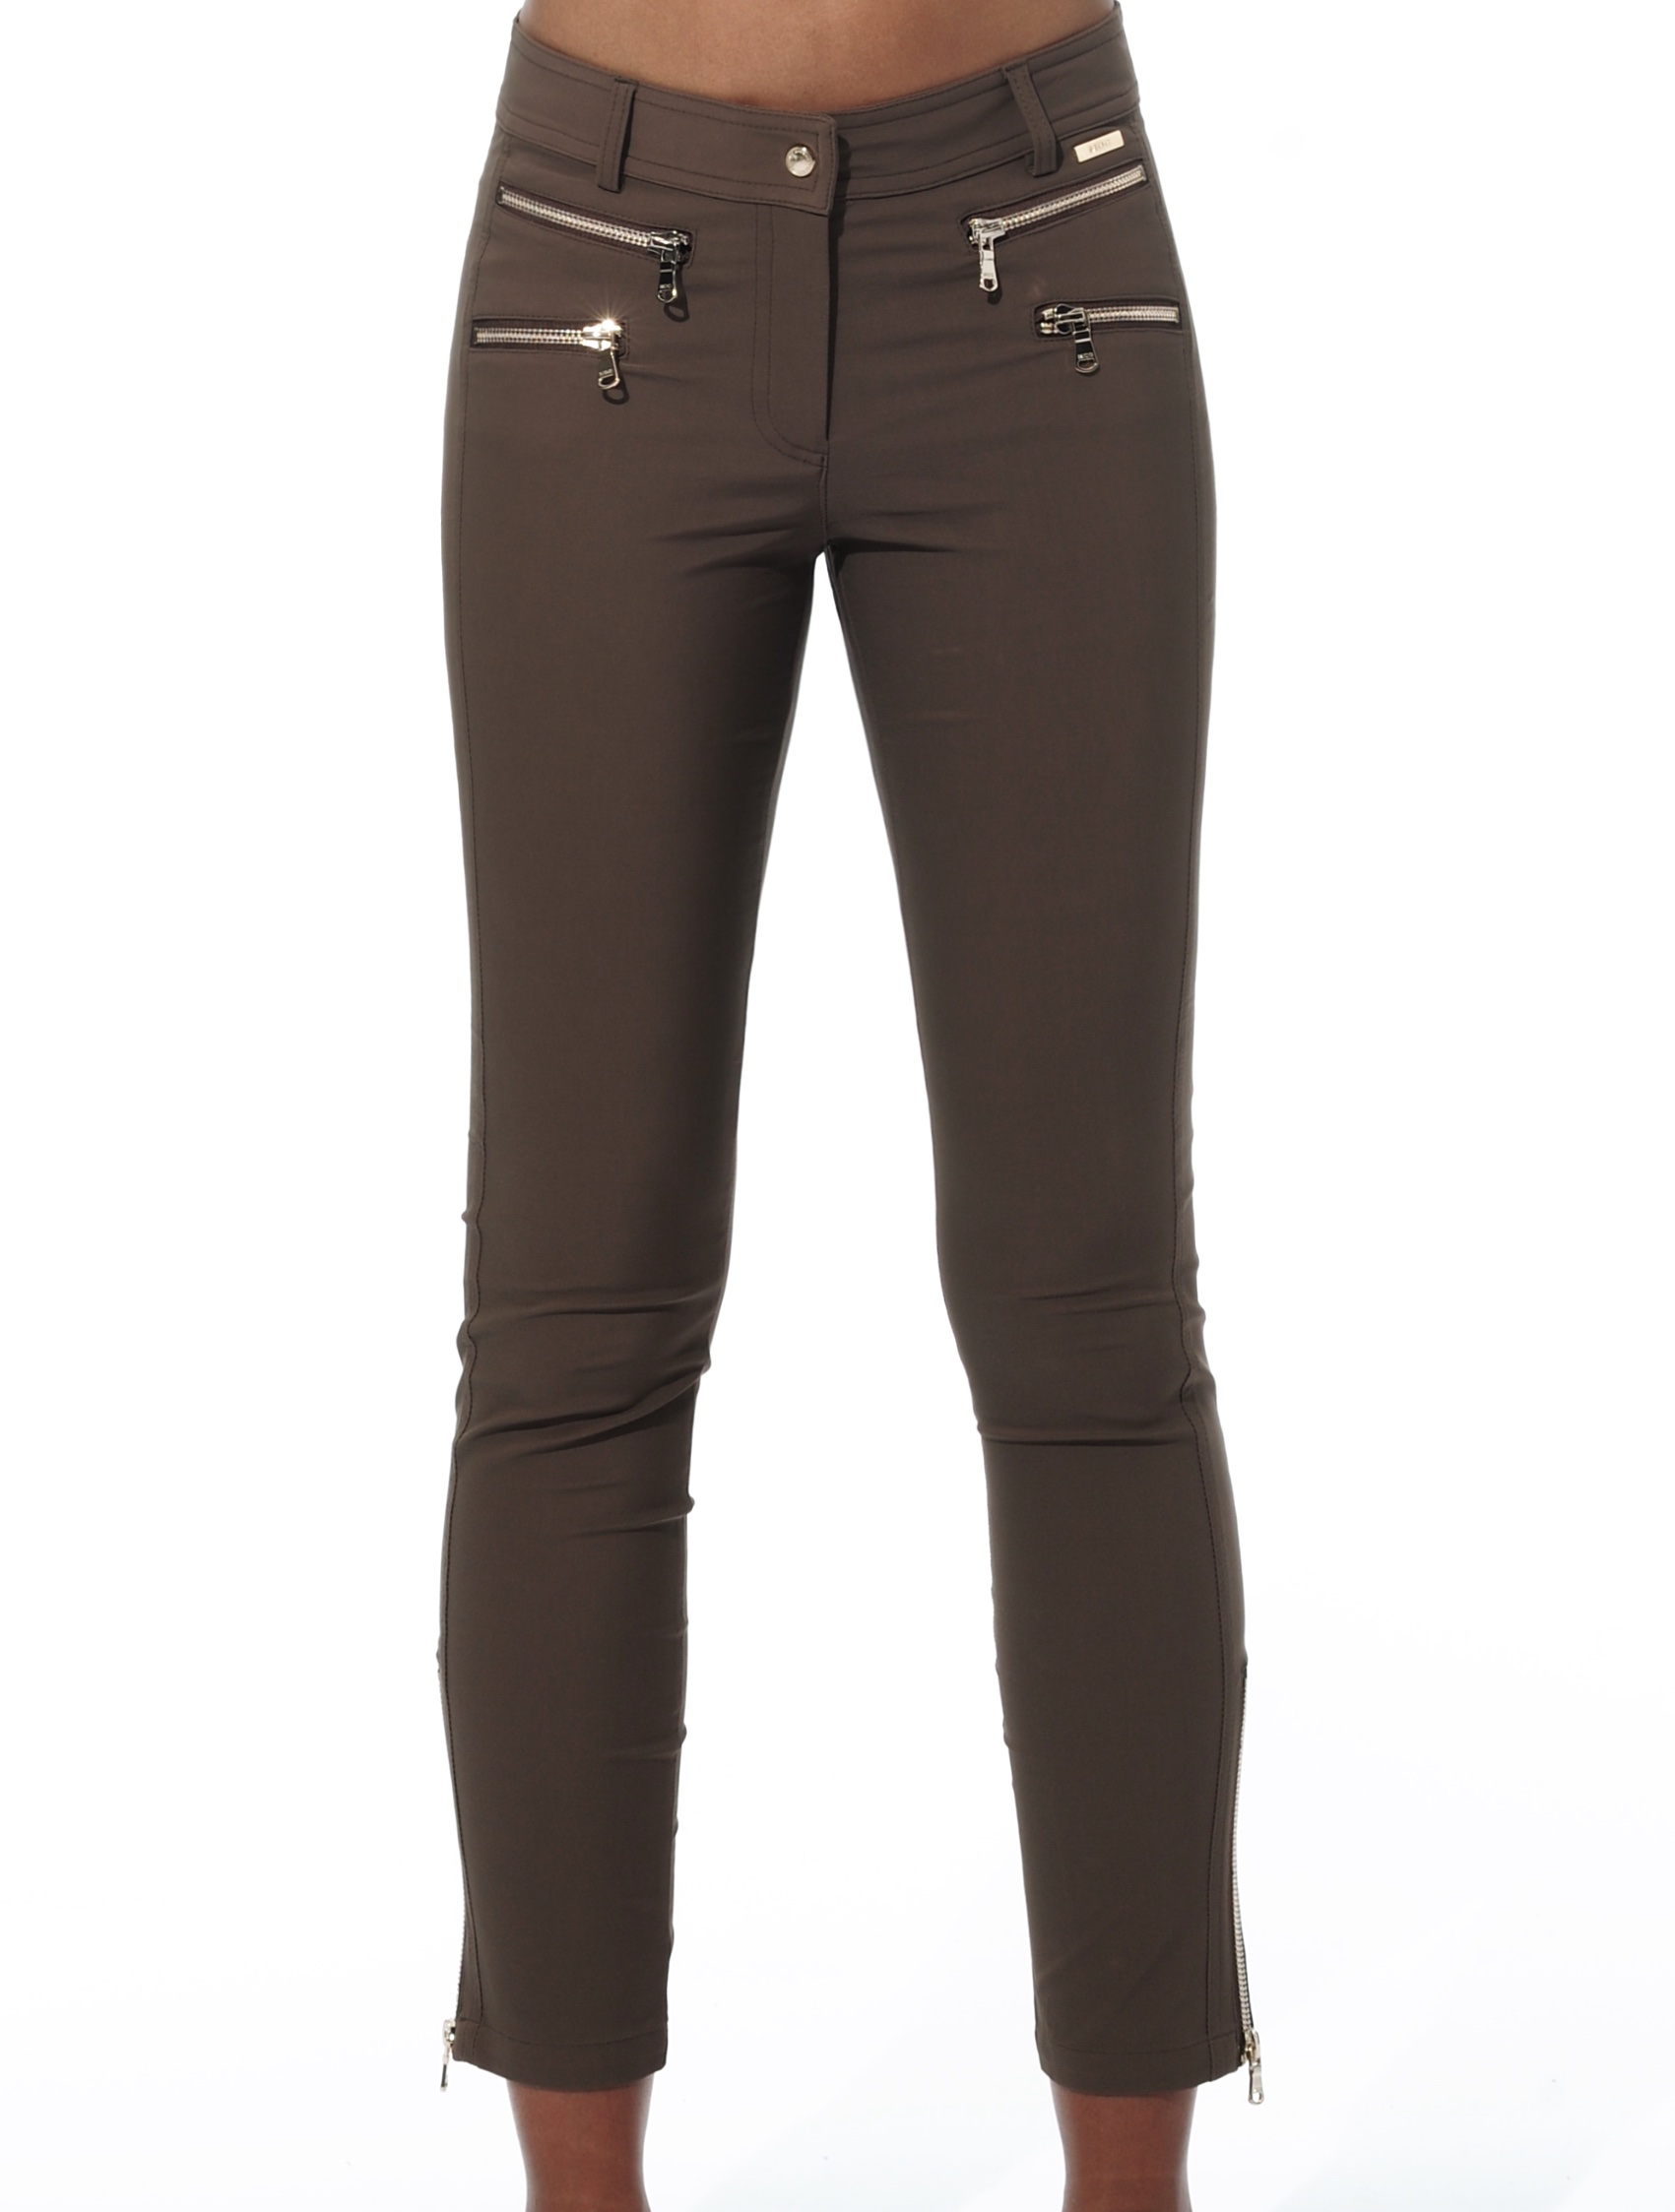 4way stretch double zip ankle pants chocolate 